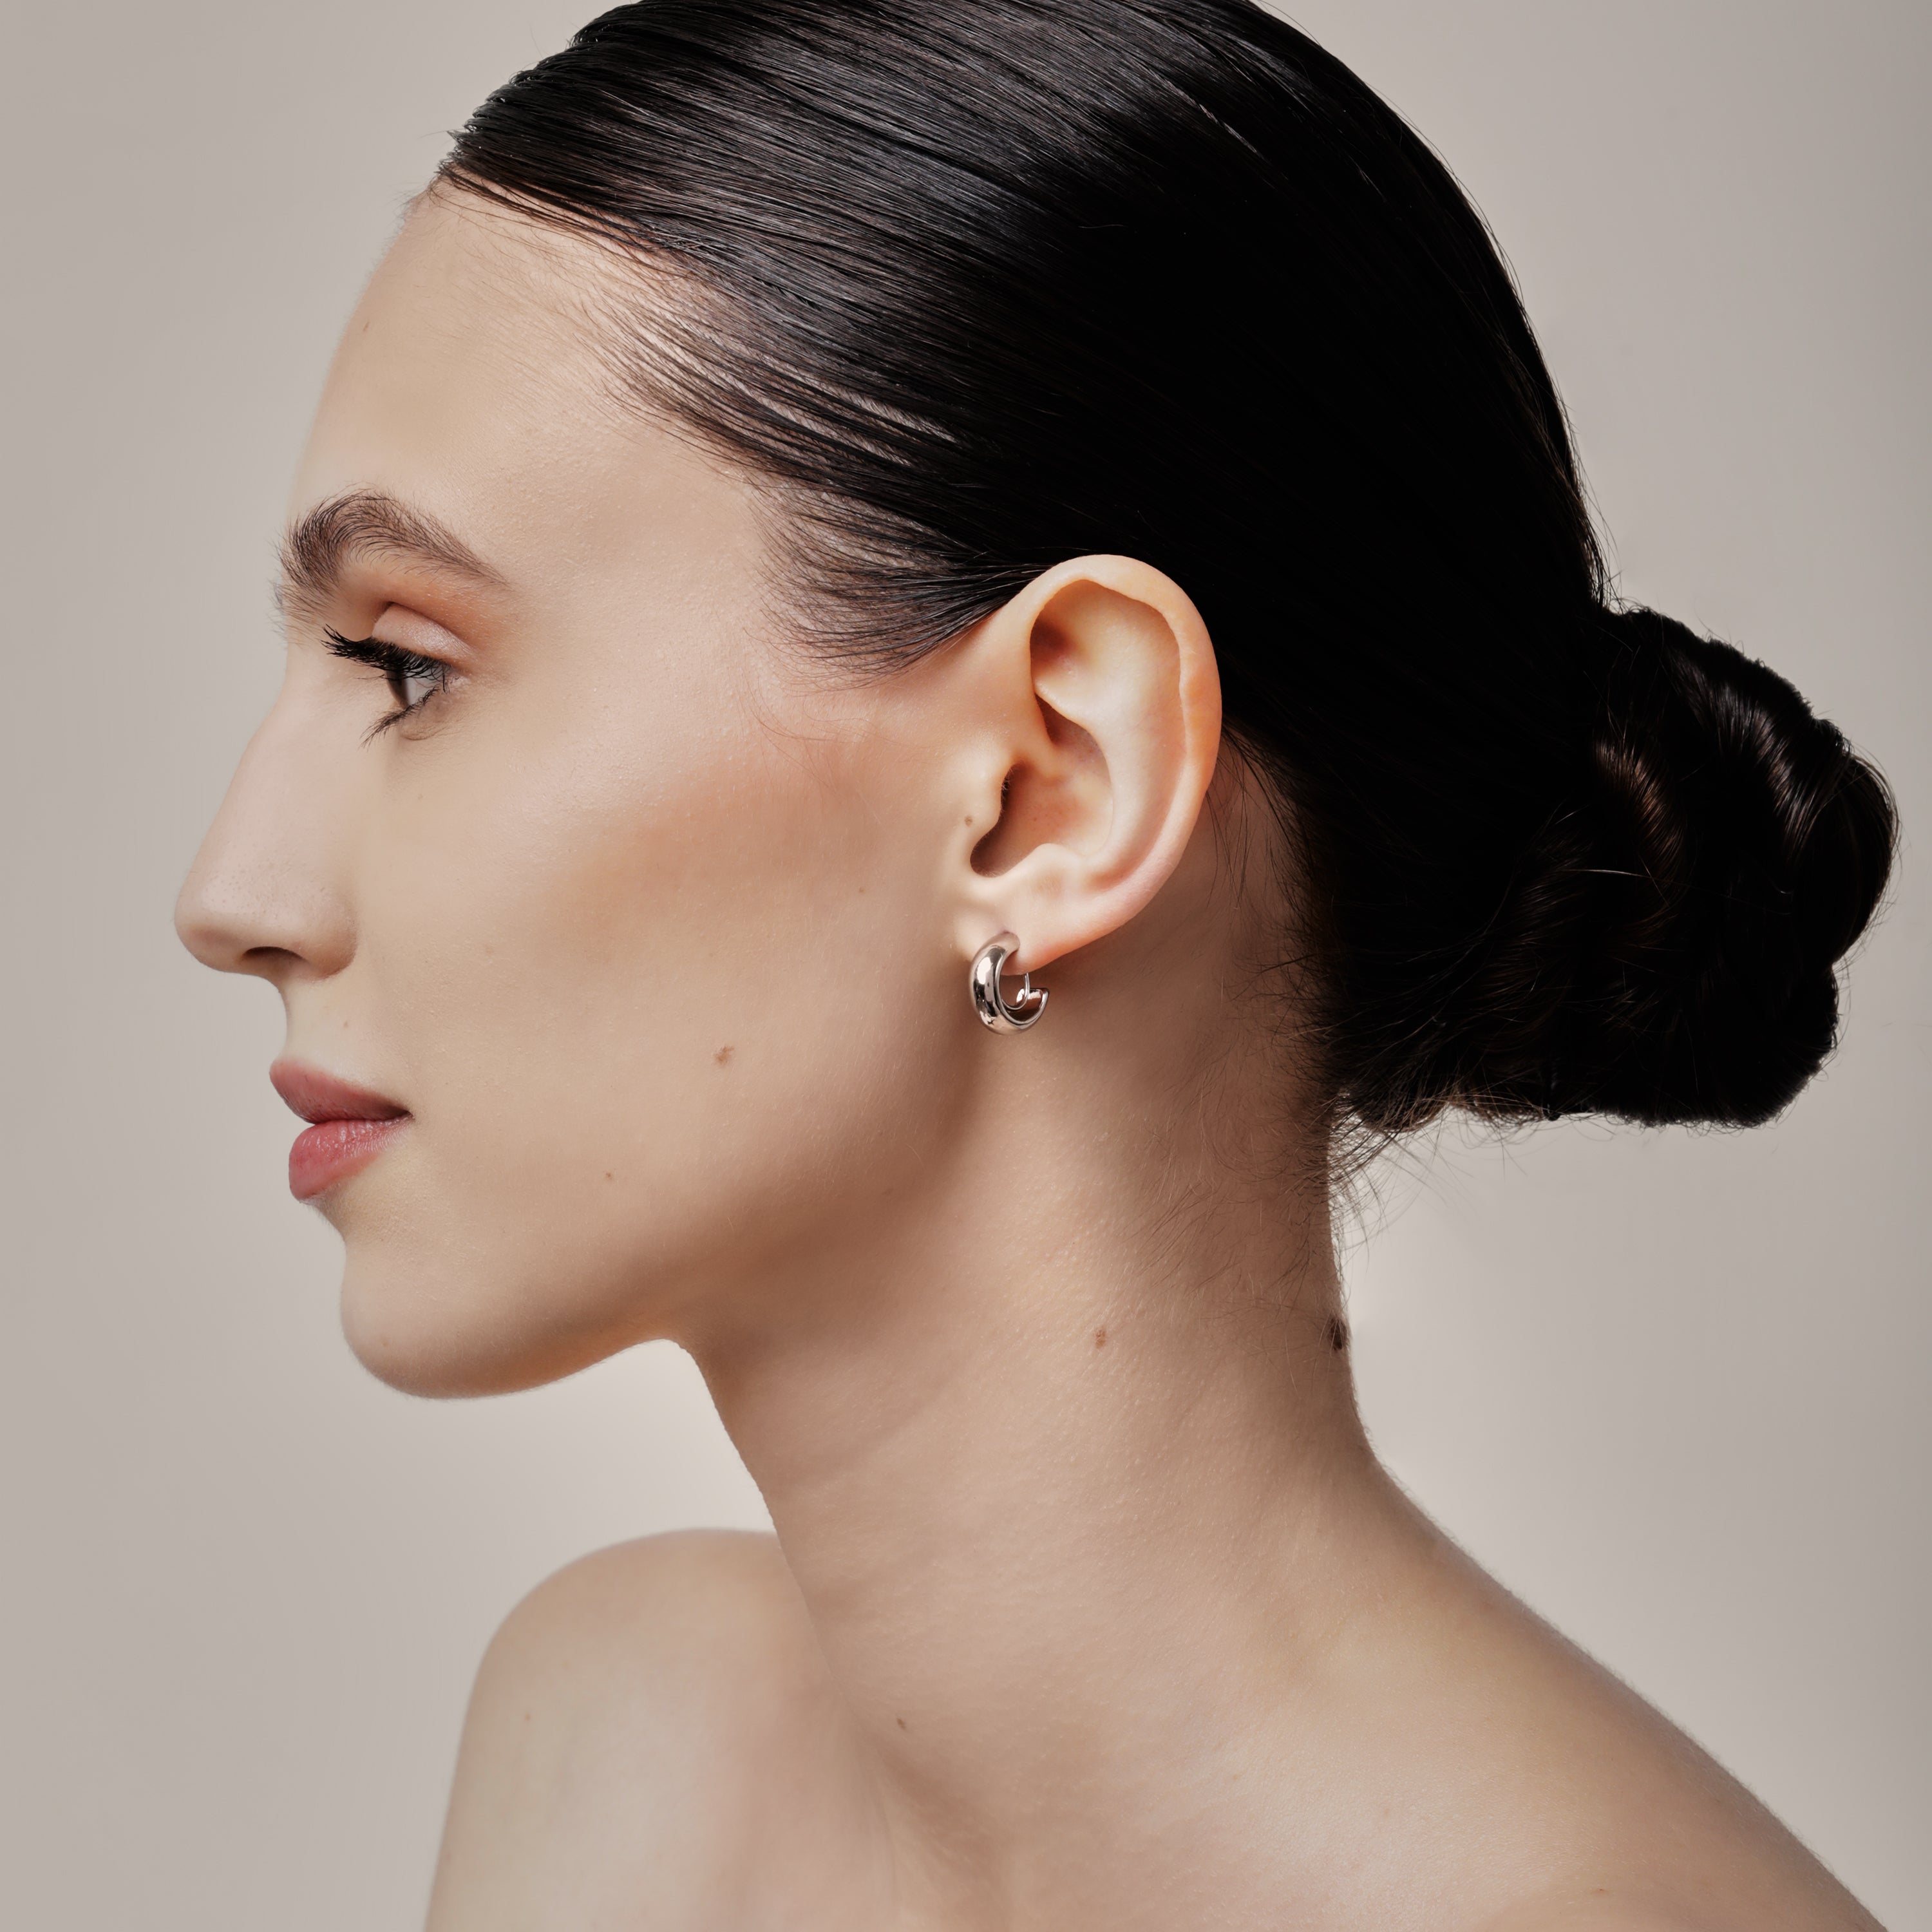 A model wearing the Simple Silver Huggie Clip-On Earrings provide a medium secure hold, making them perfect for all ear types. With adjustable padding for extra comfort, these earrings can be worn for up to 24 hours with ease. Crafted from copper alloy, they are also available in a gold finish.